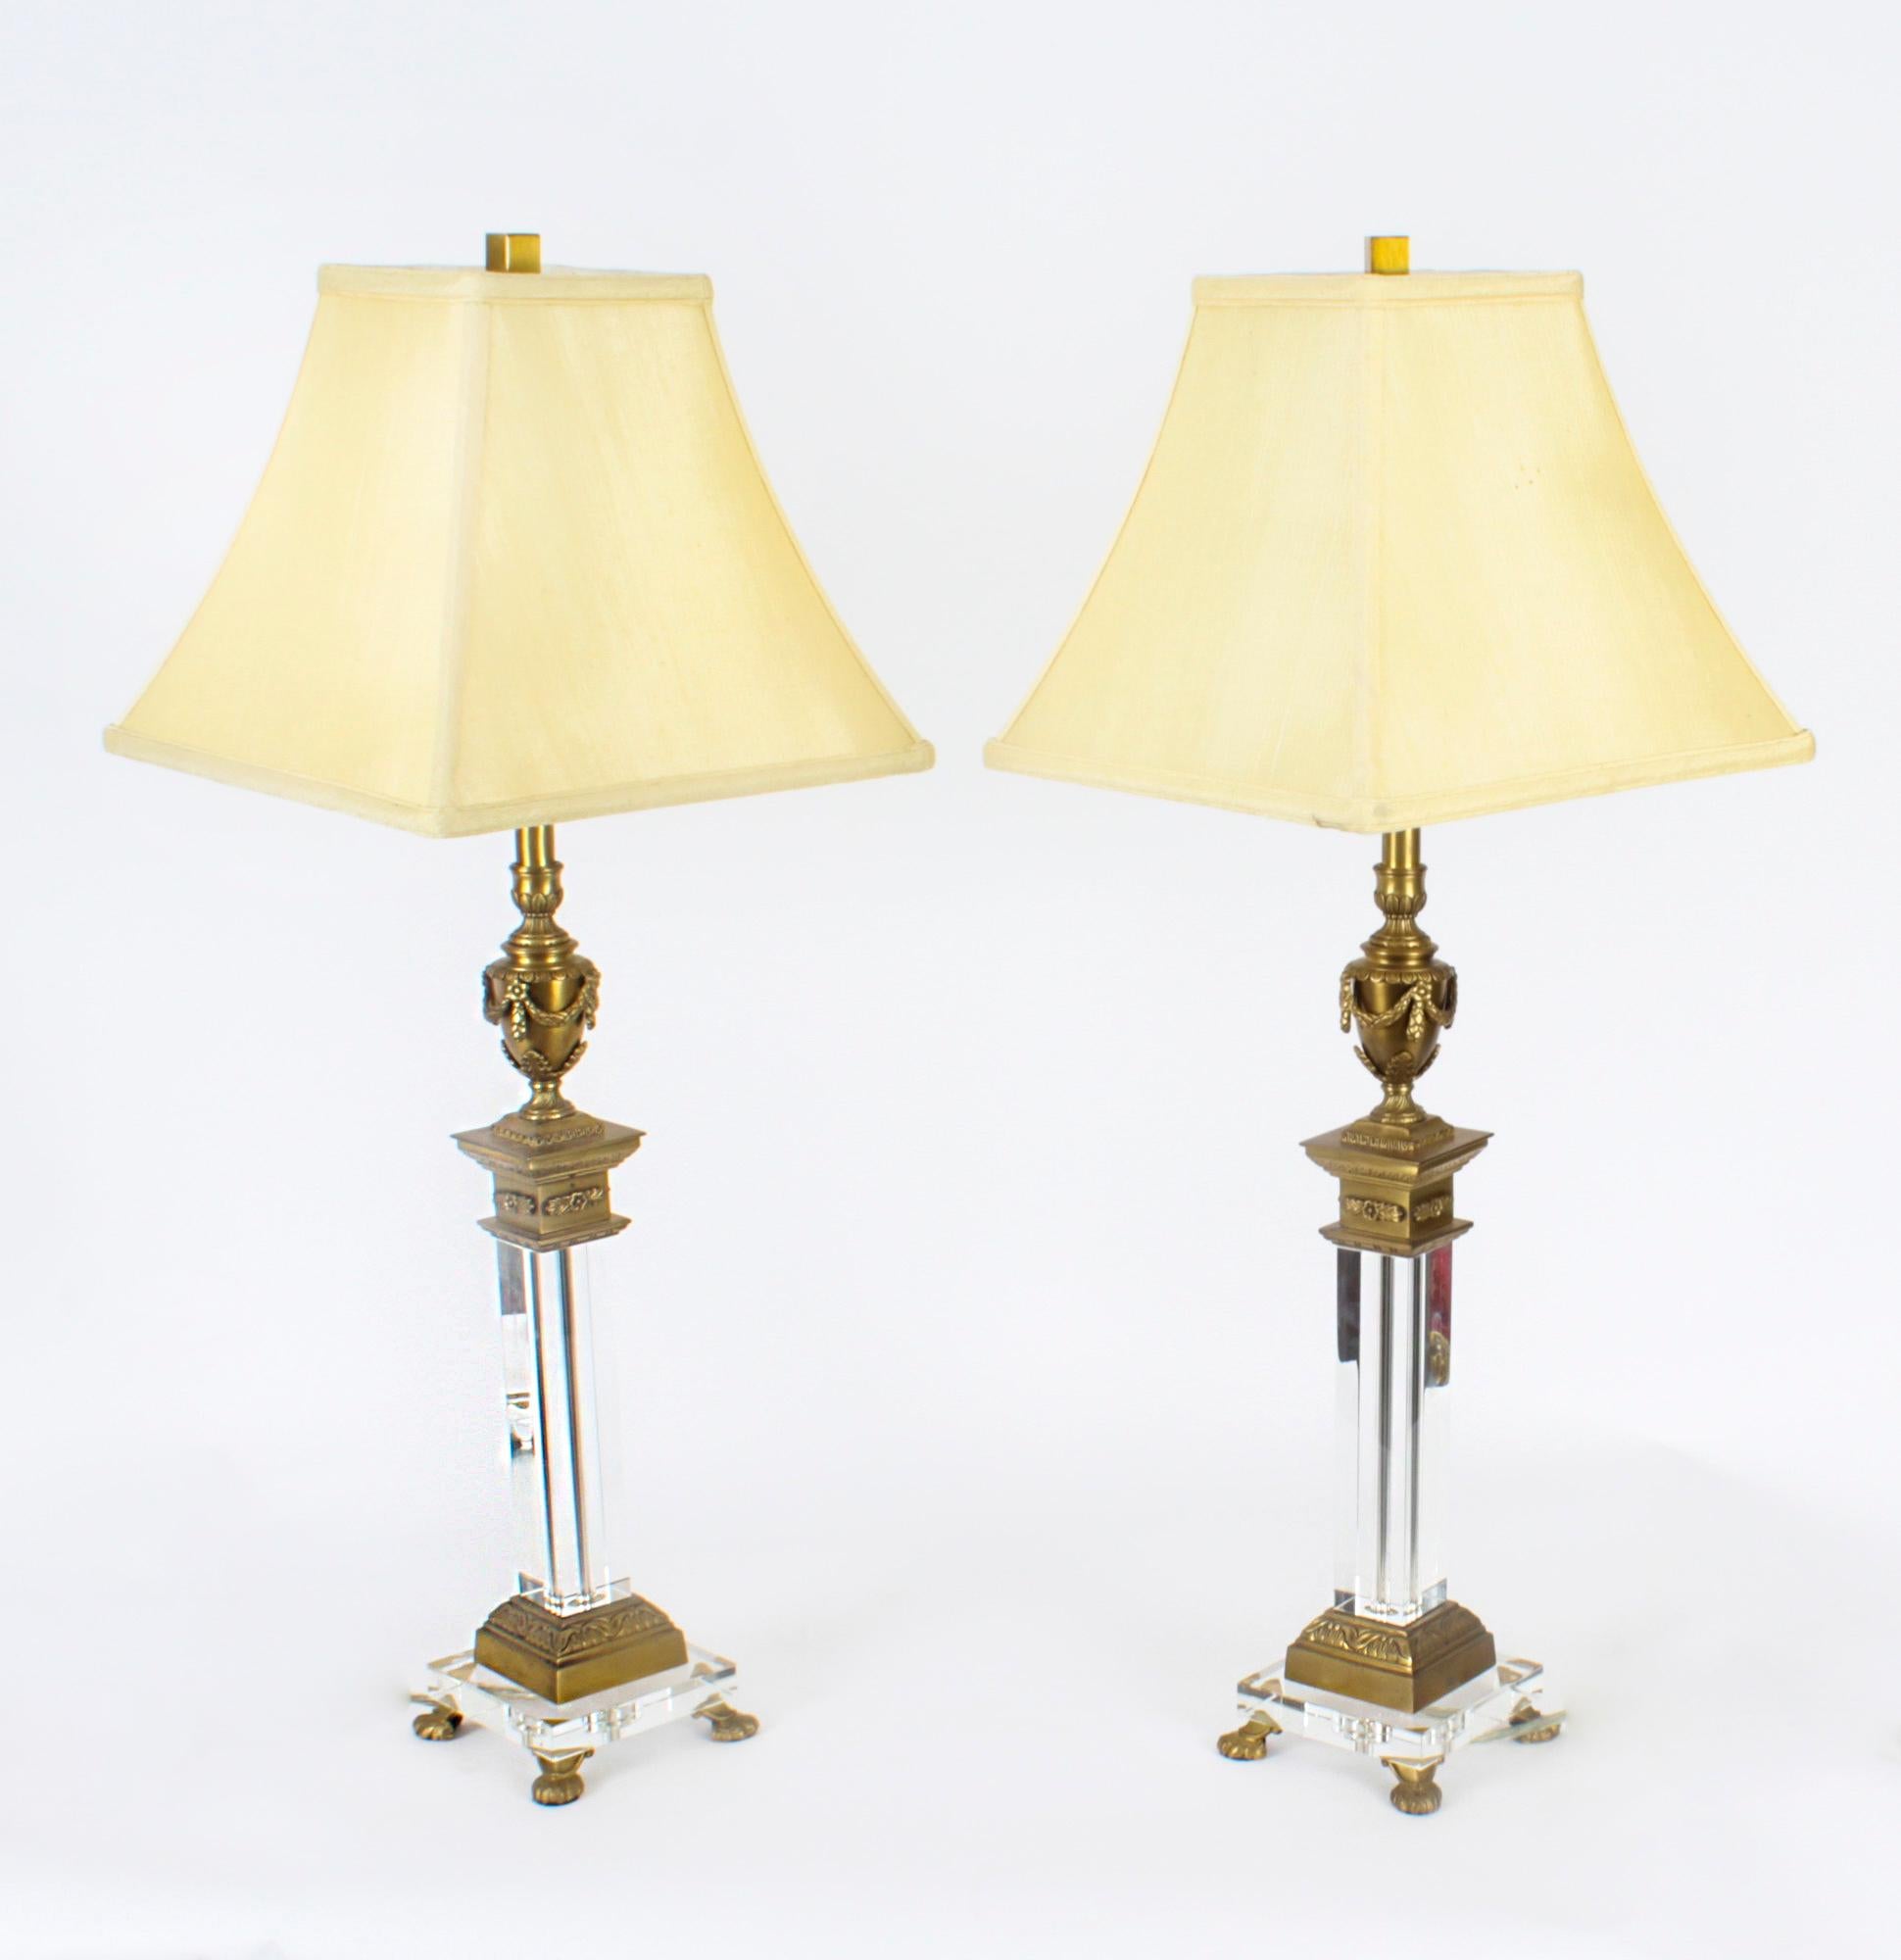 Vintage Set of 4 Corinthian Column Ormolu & Glass Table Lamps, Mid-20th Century In Good Condition For Sale In London, GB